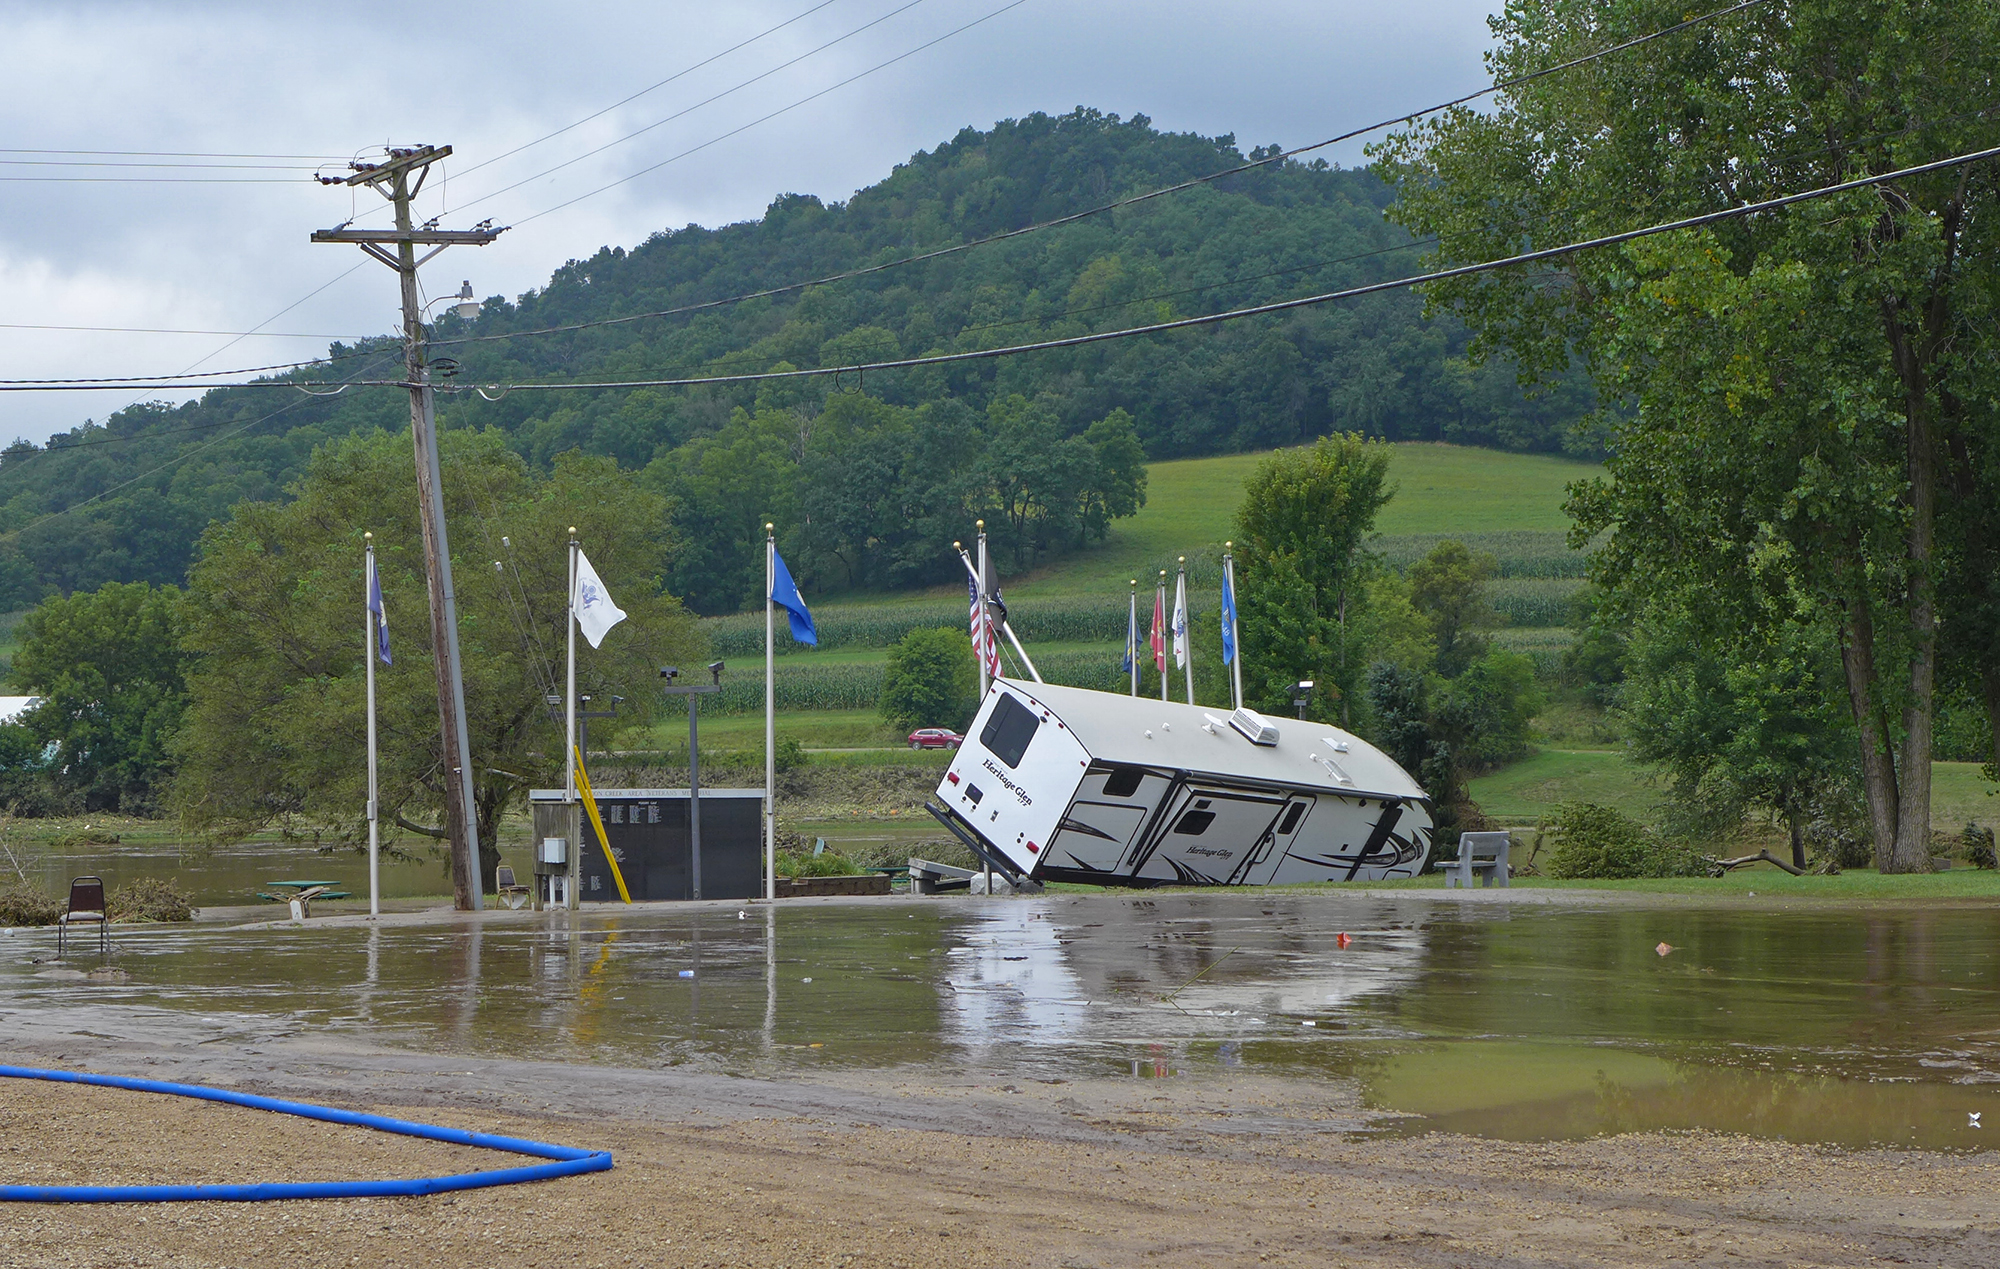 An RV floated into the American Legion's flag poles